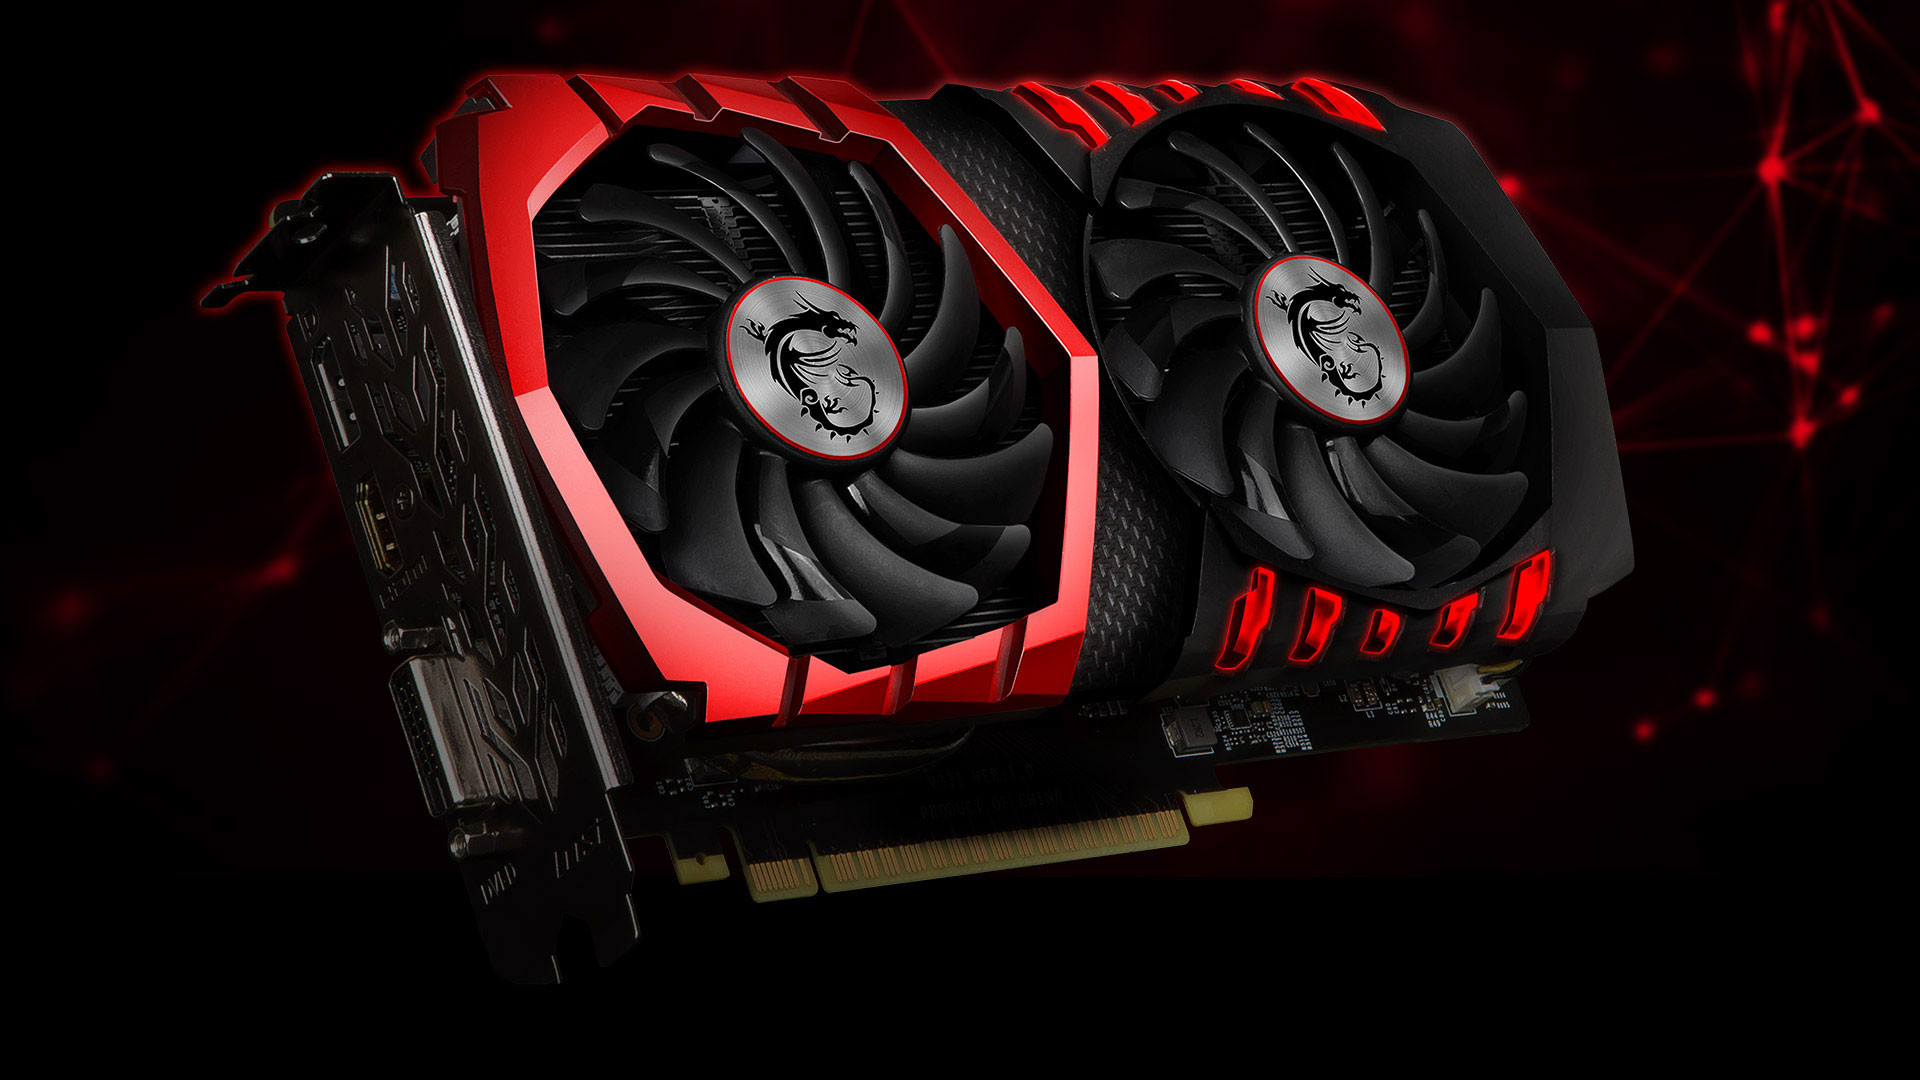 1920x1080 THE ULTIMATE GAMING GRAPHICS CARD